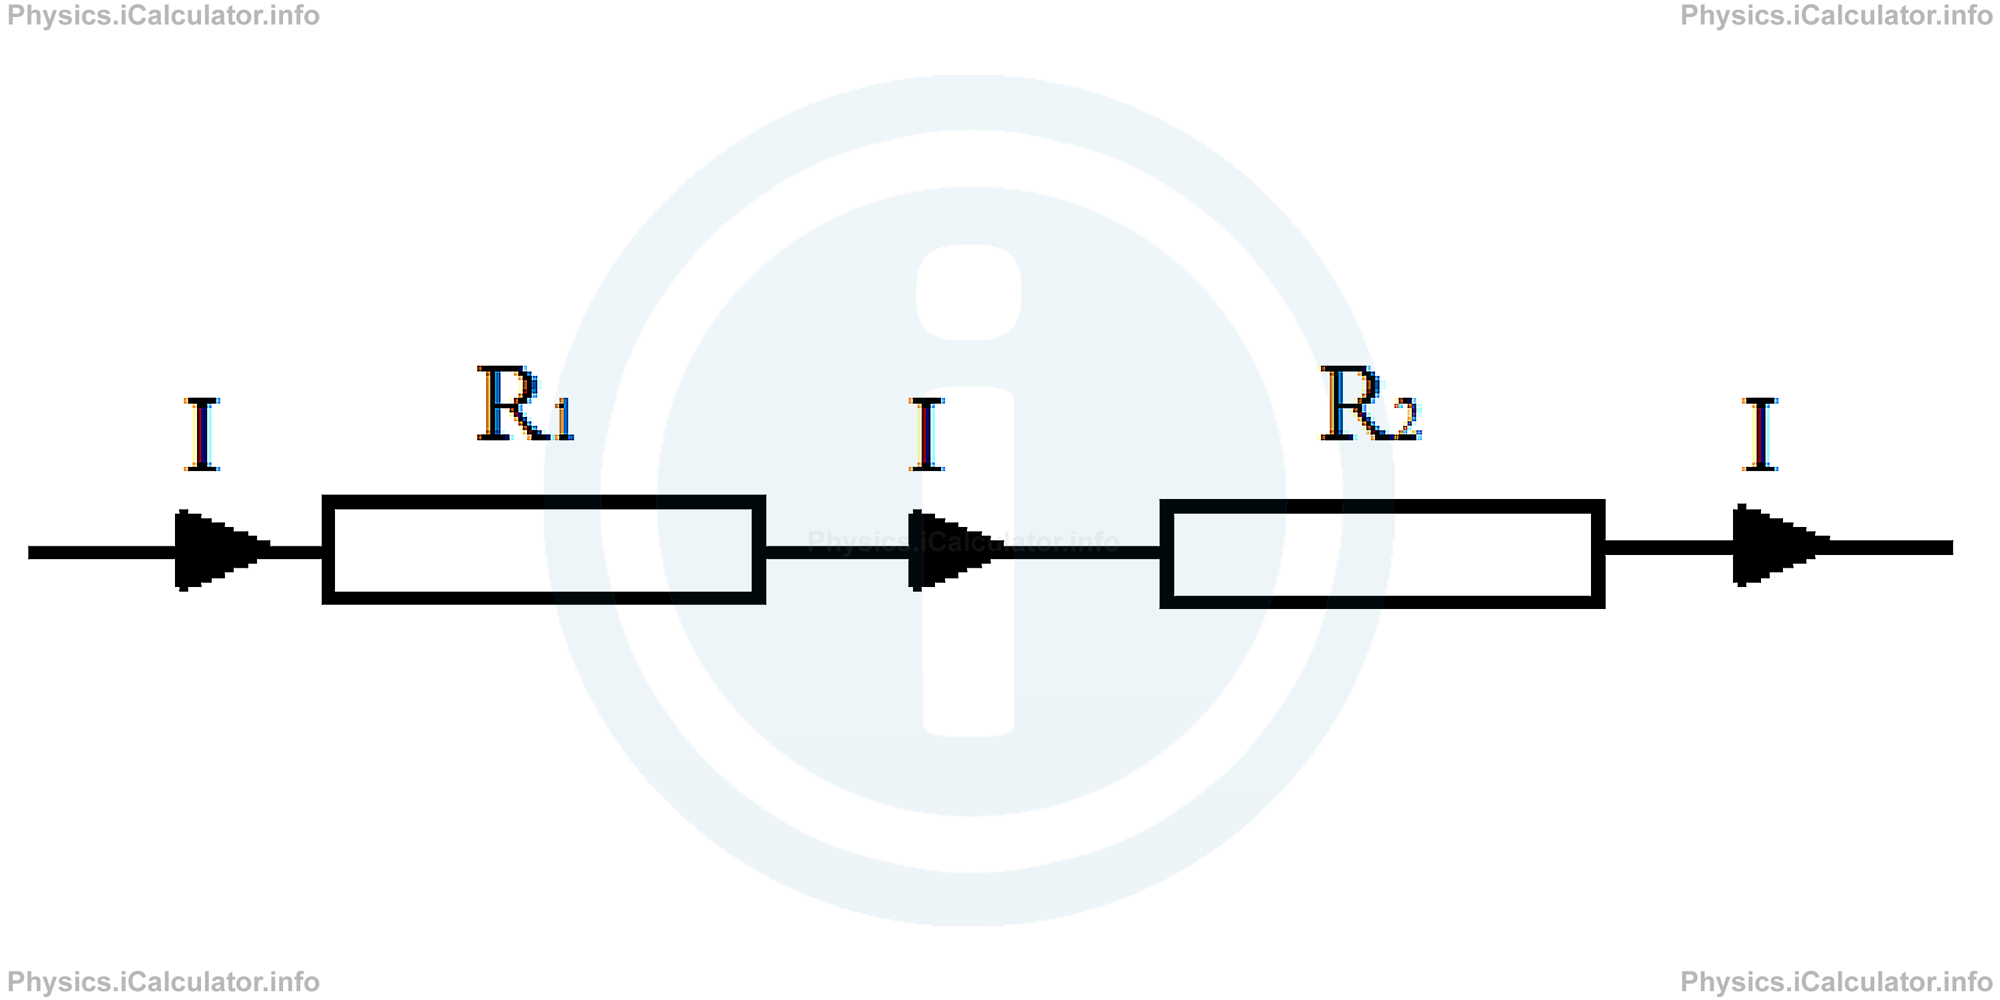 Physics Tutorials: This image provides visual information for the physics tutorial Electric Resistance. Combinations of Resistors 